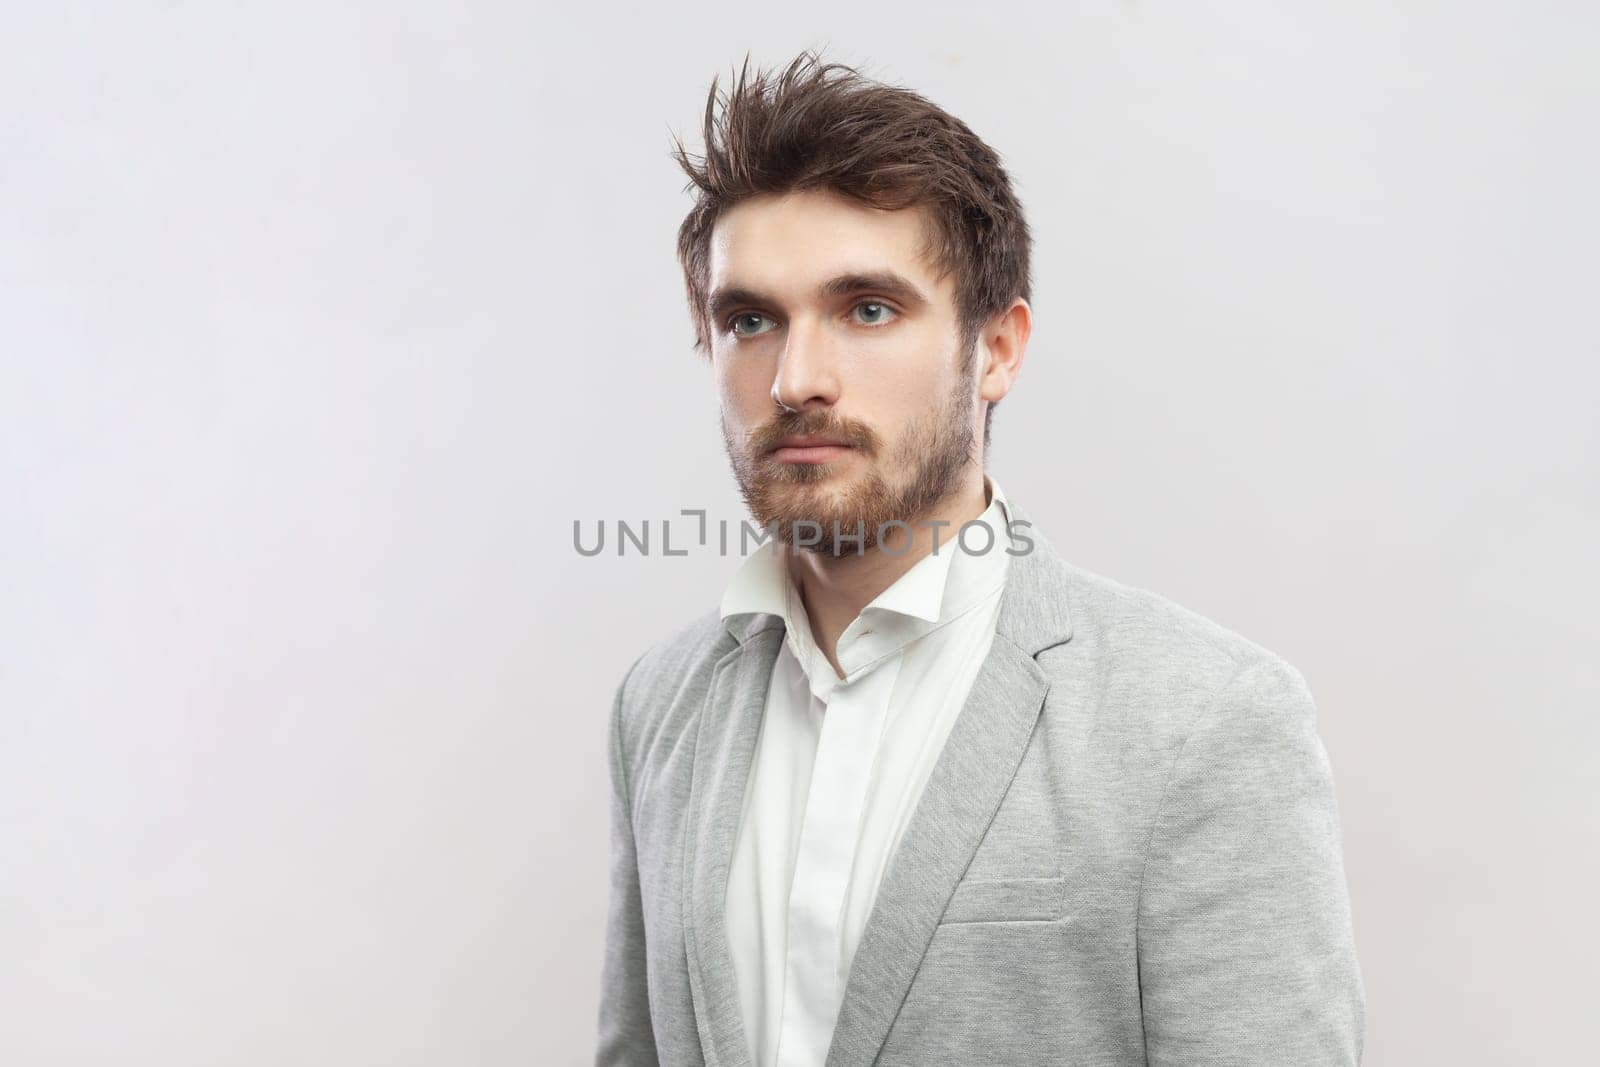 Portrait of handsome attractive young bearded man standing with serious concentrated facial expression, looking away, wearing grey suit. Indoor studio shot isolated on gray background.